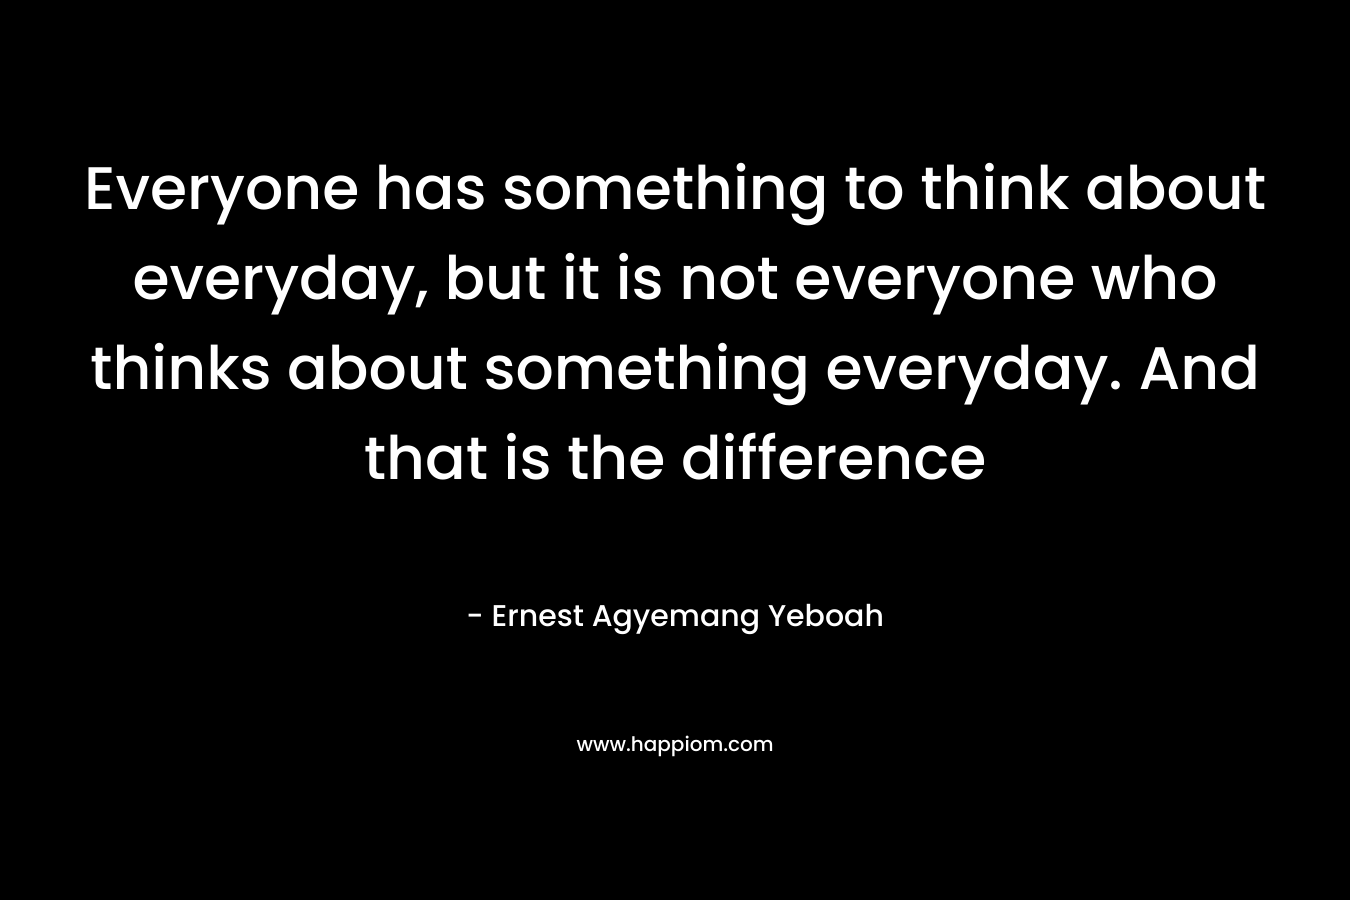 Everyone has something to think about everyday, but it is not everyone who thinks about something everyday. And that is the difference